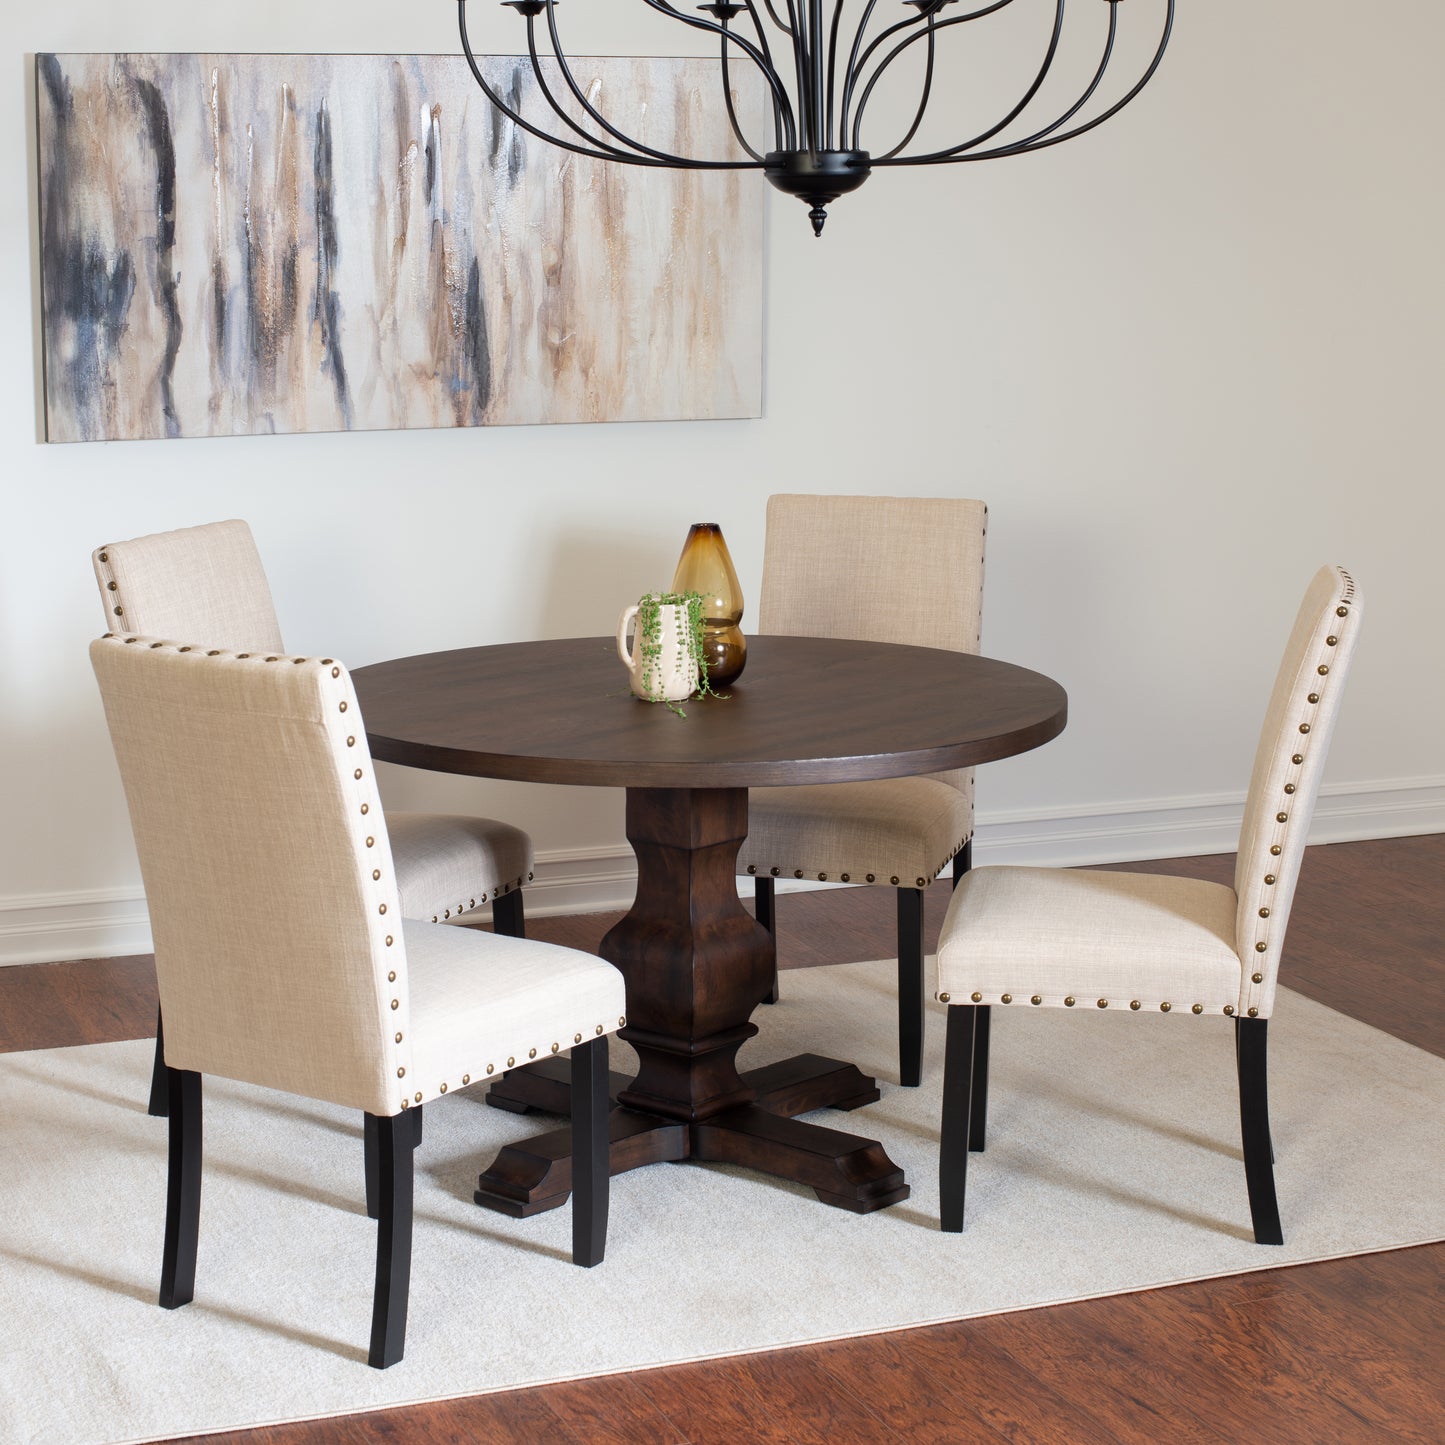 Kohland 5-piece Dining Set, Pedestal Round Table with 4 Stylish Chairs